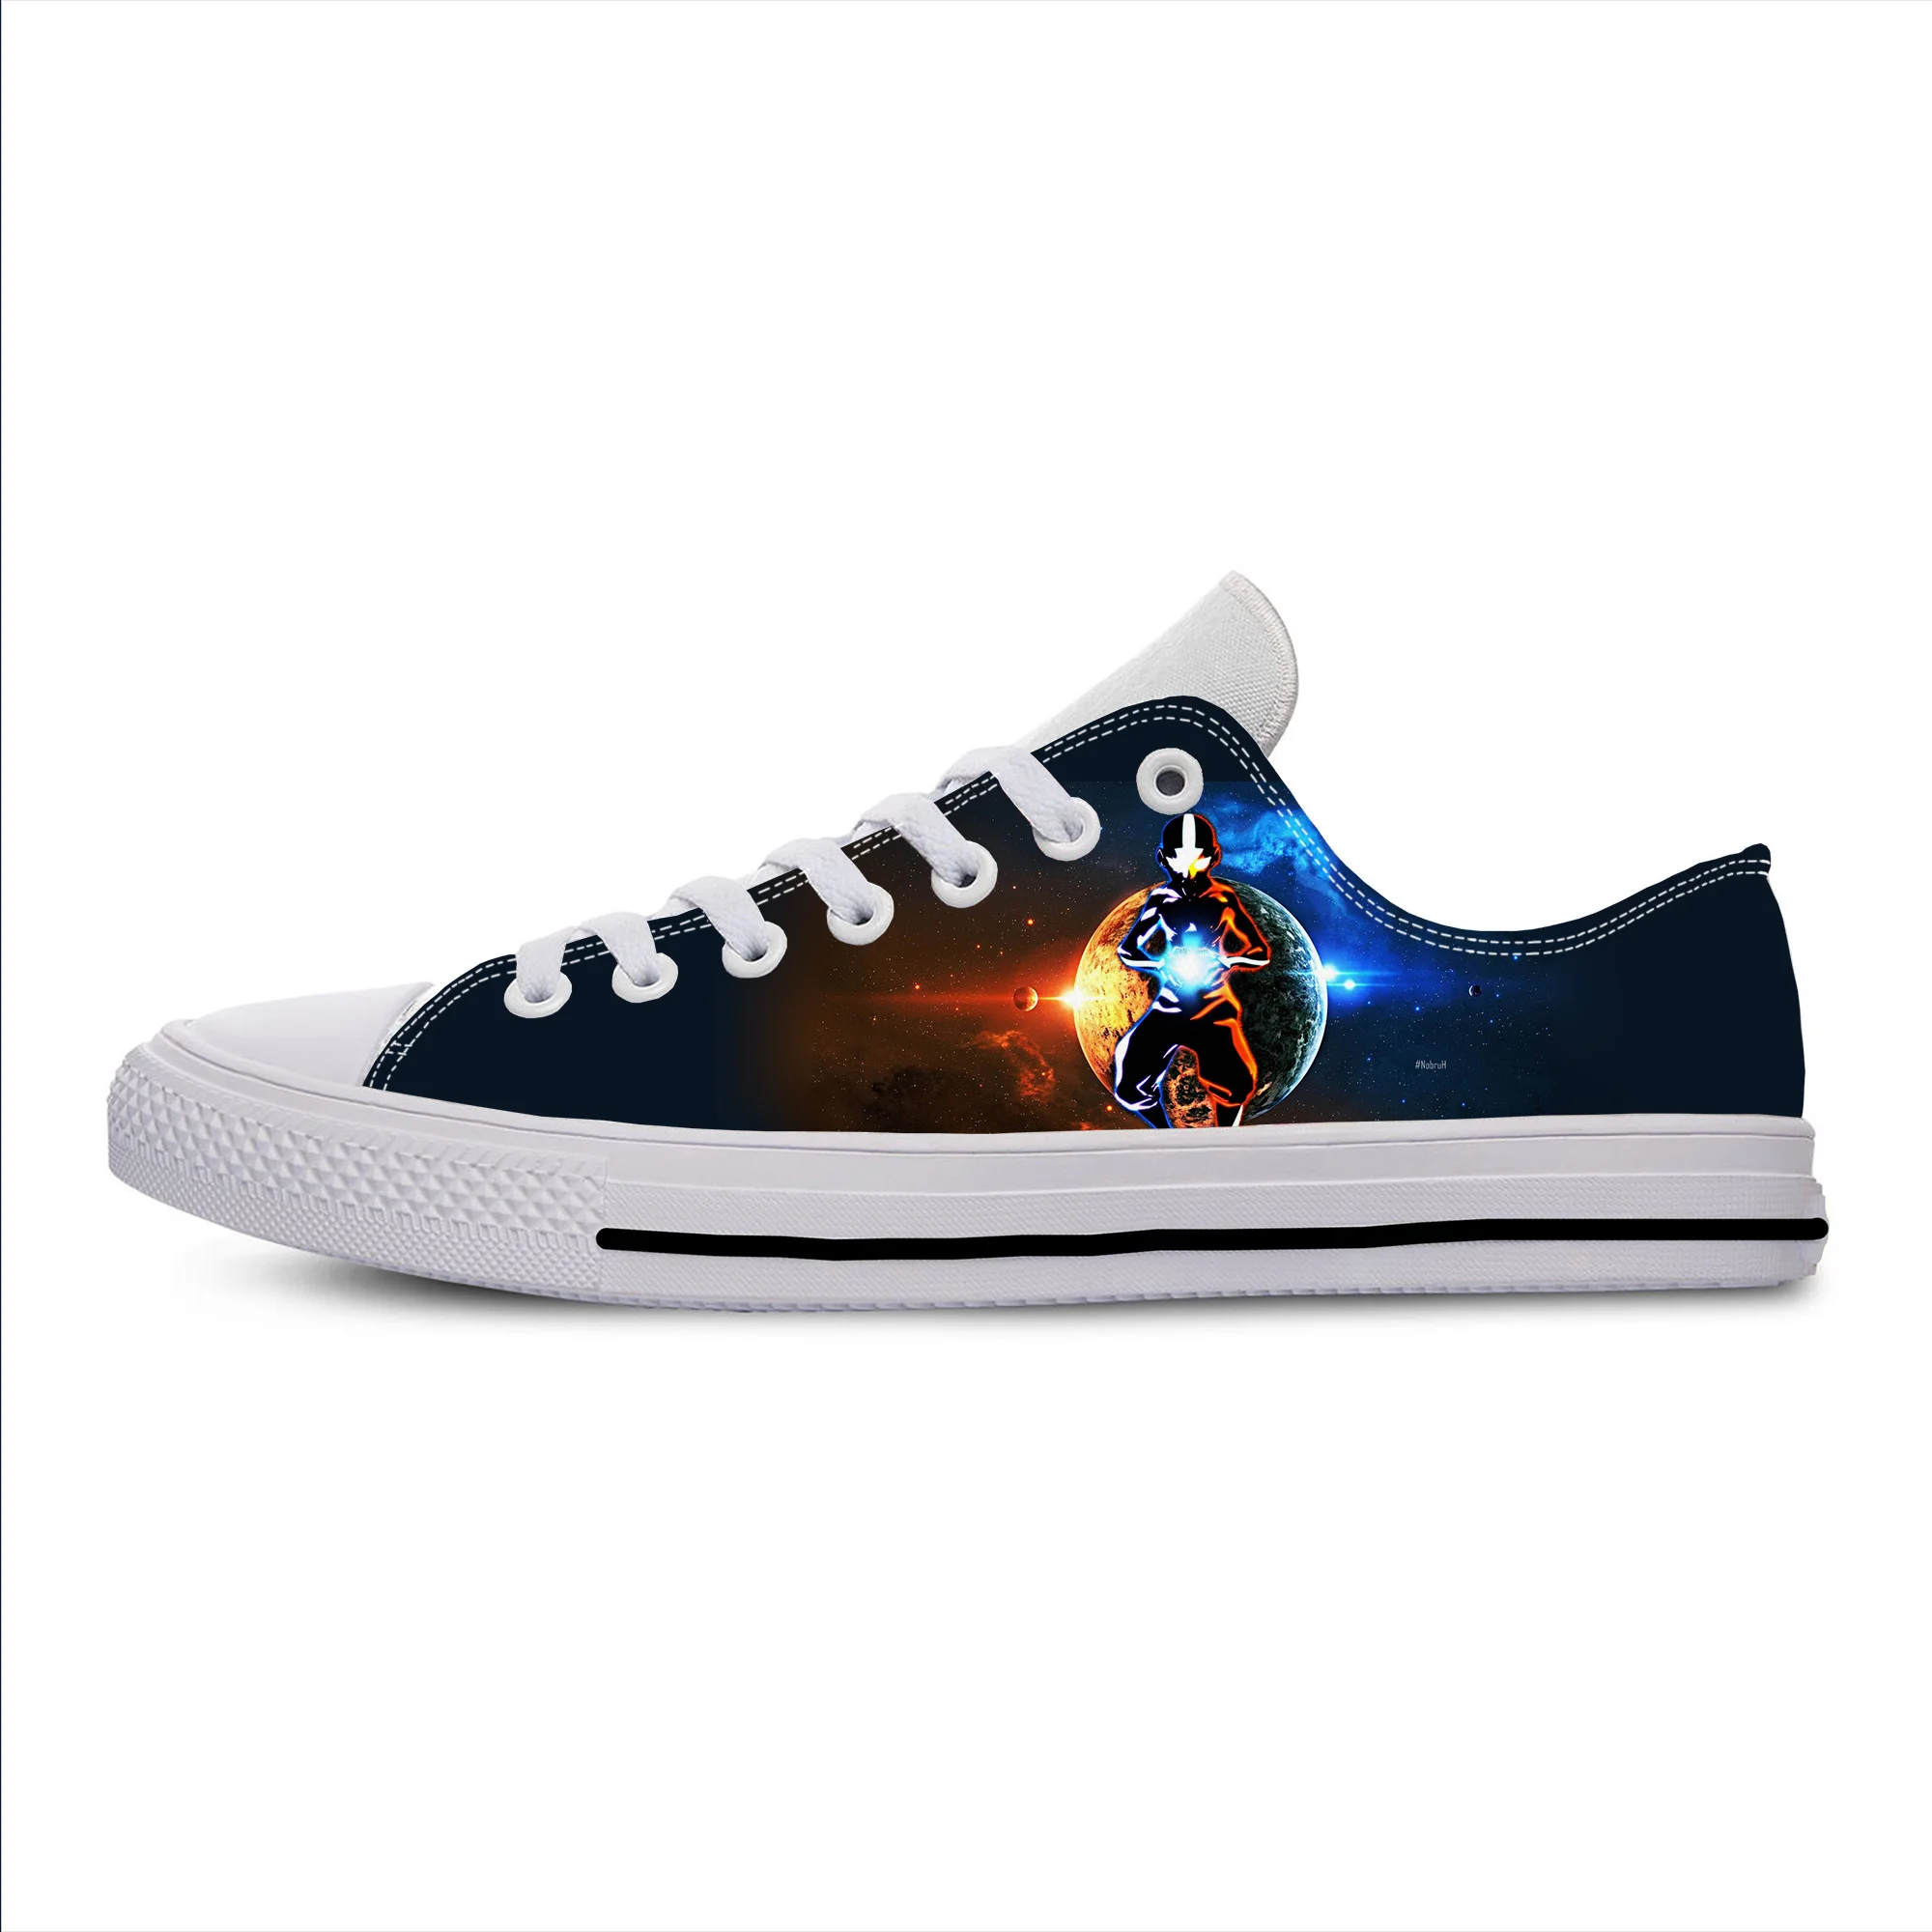 

Summer Anime Manga Cartoon Avatar The Last Airbender Casual Shoes Low Top Breathable Board Shoes Lightweight Men Women Sneakers